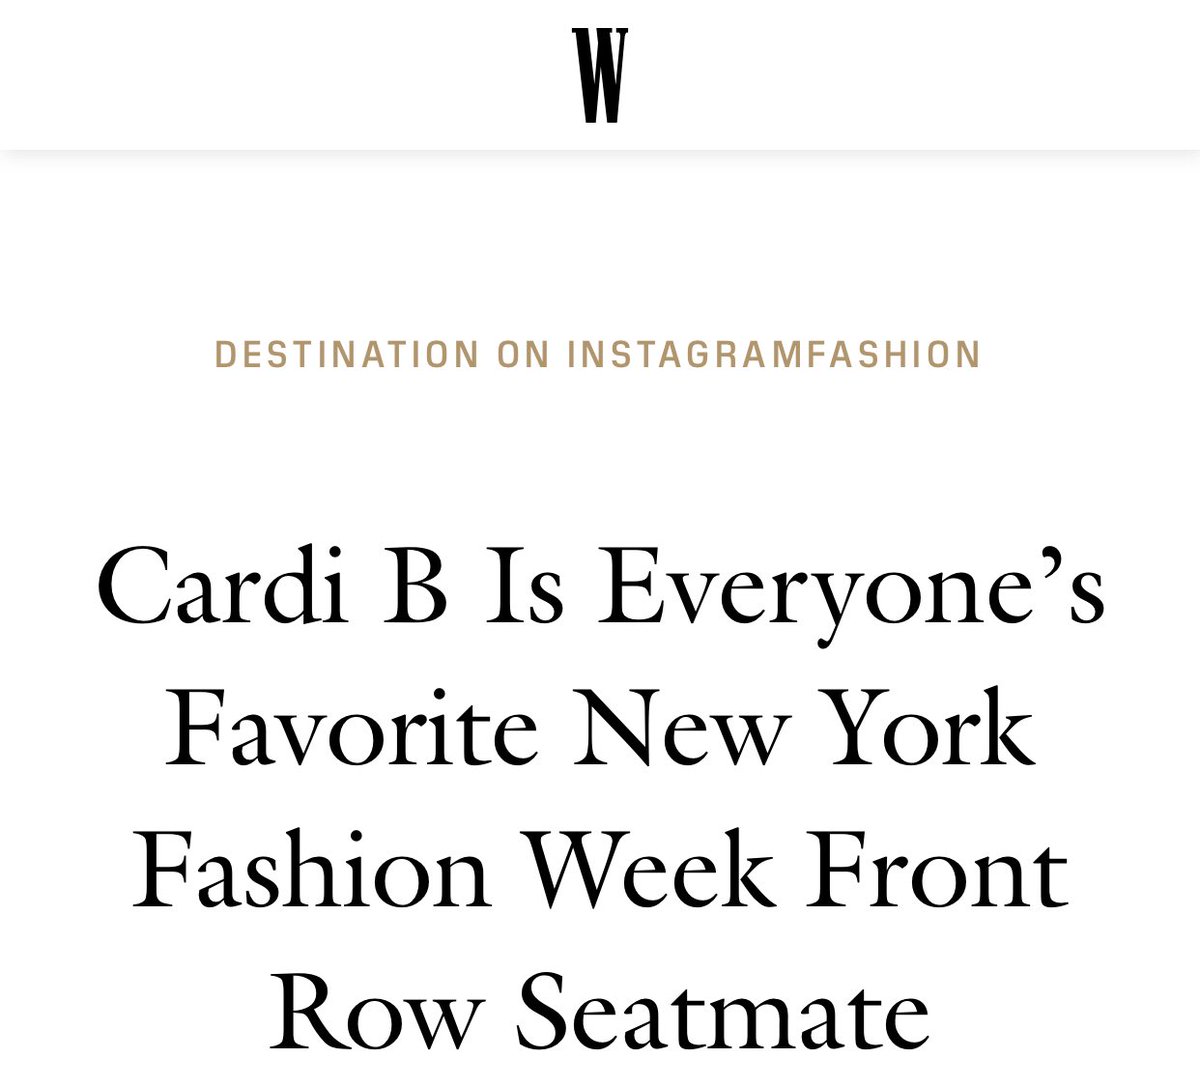 Cardi’s status as a fashion girl increased dramatically when she was given the honor of sitting next to Anna Wintour at Alexander Wang’s Spring 2018 NYFW show.: David X Prutting/BFA/REX/Shutterstock